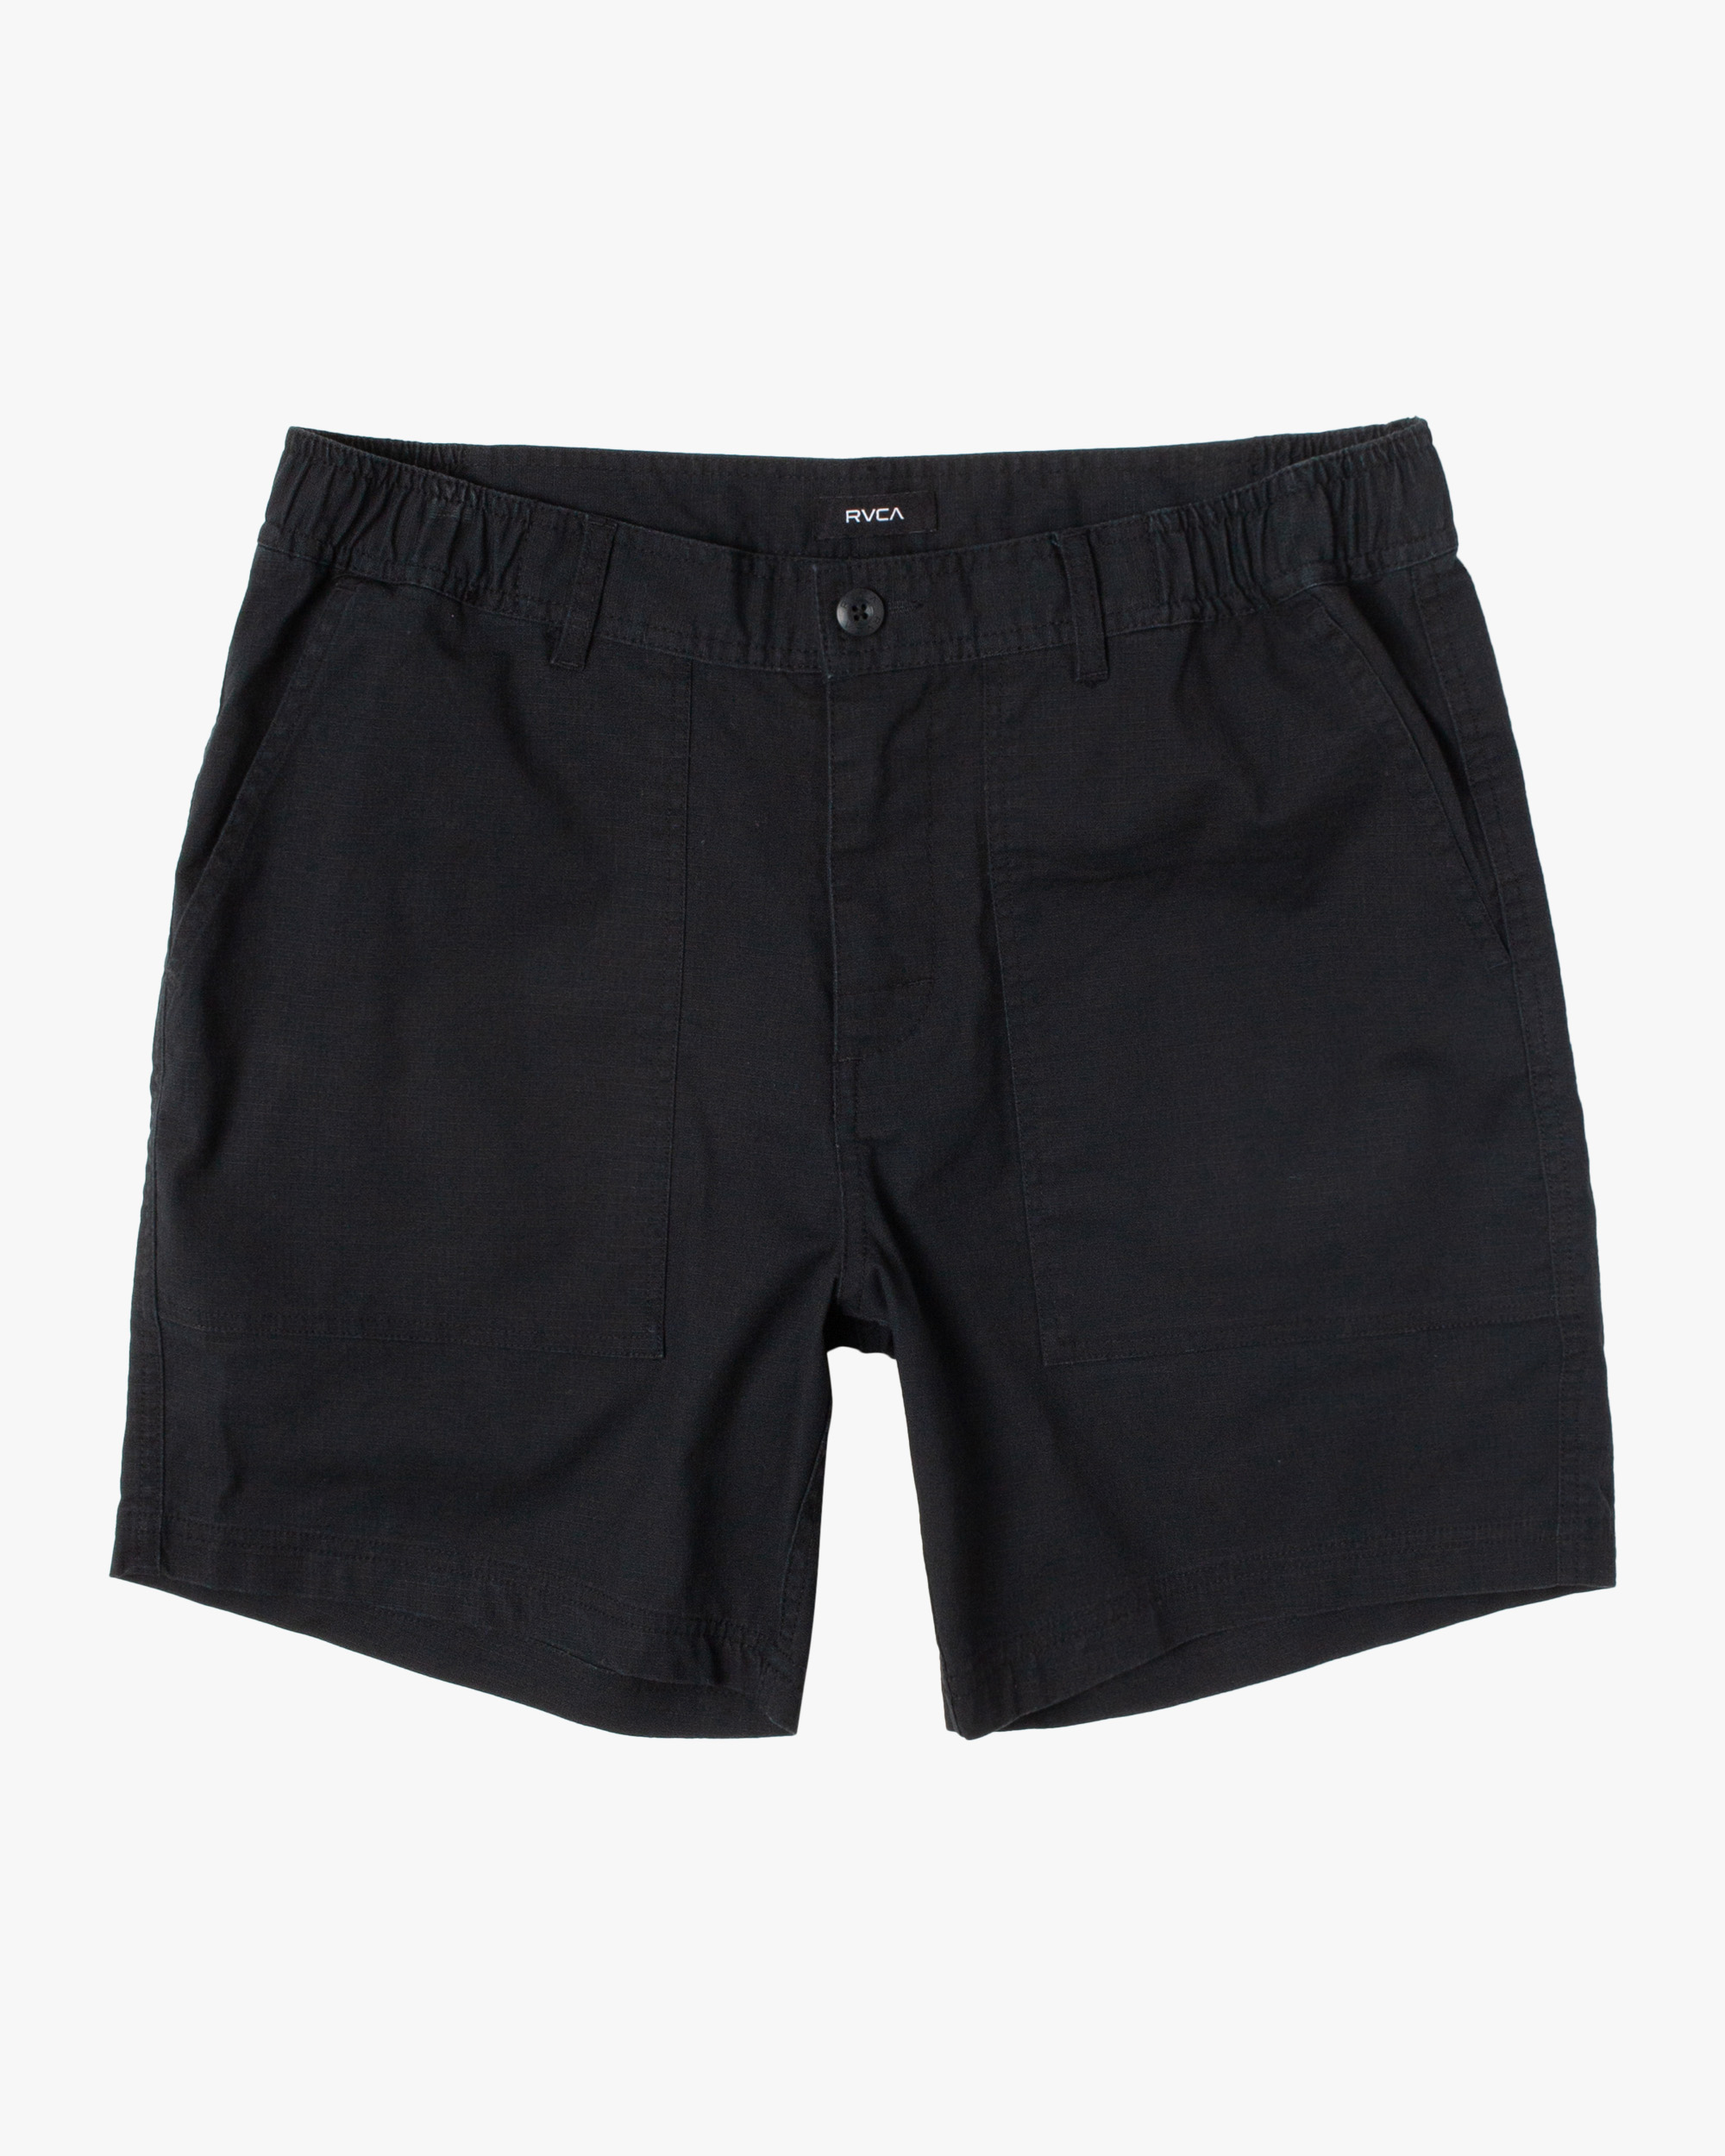 Mens All Time Surplus Shorts by RVCA | Amazon Surf